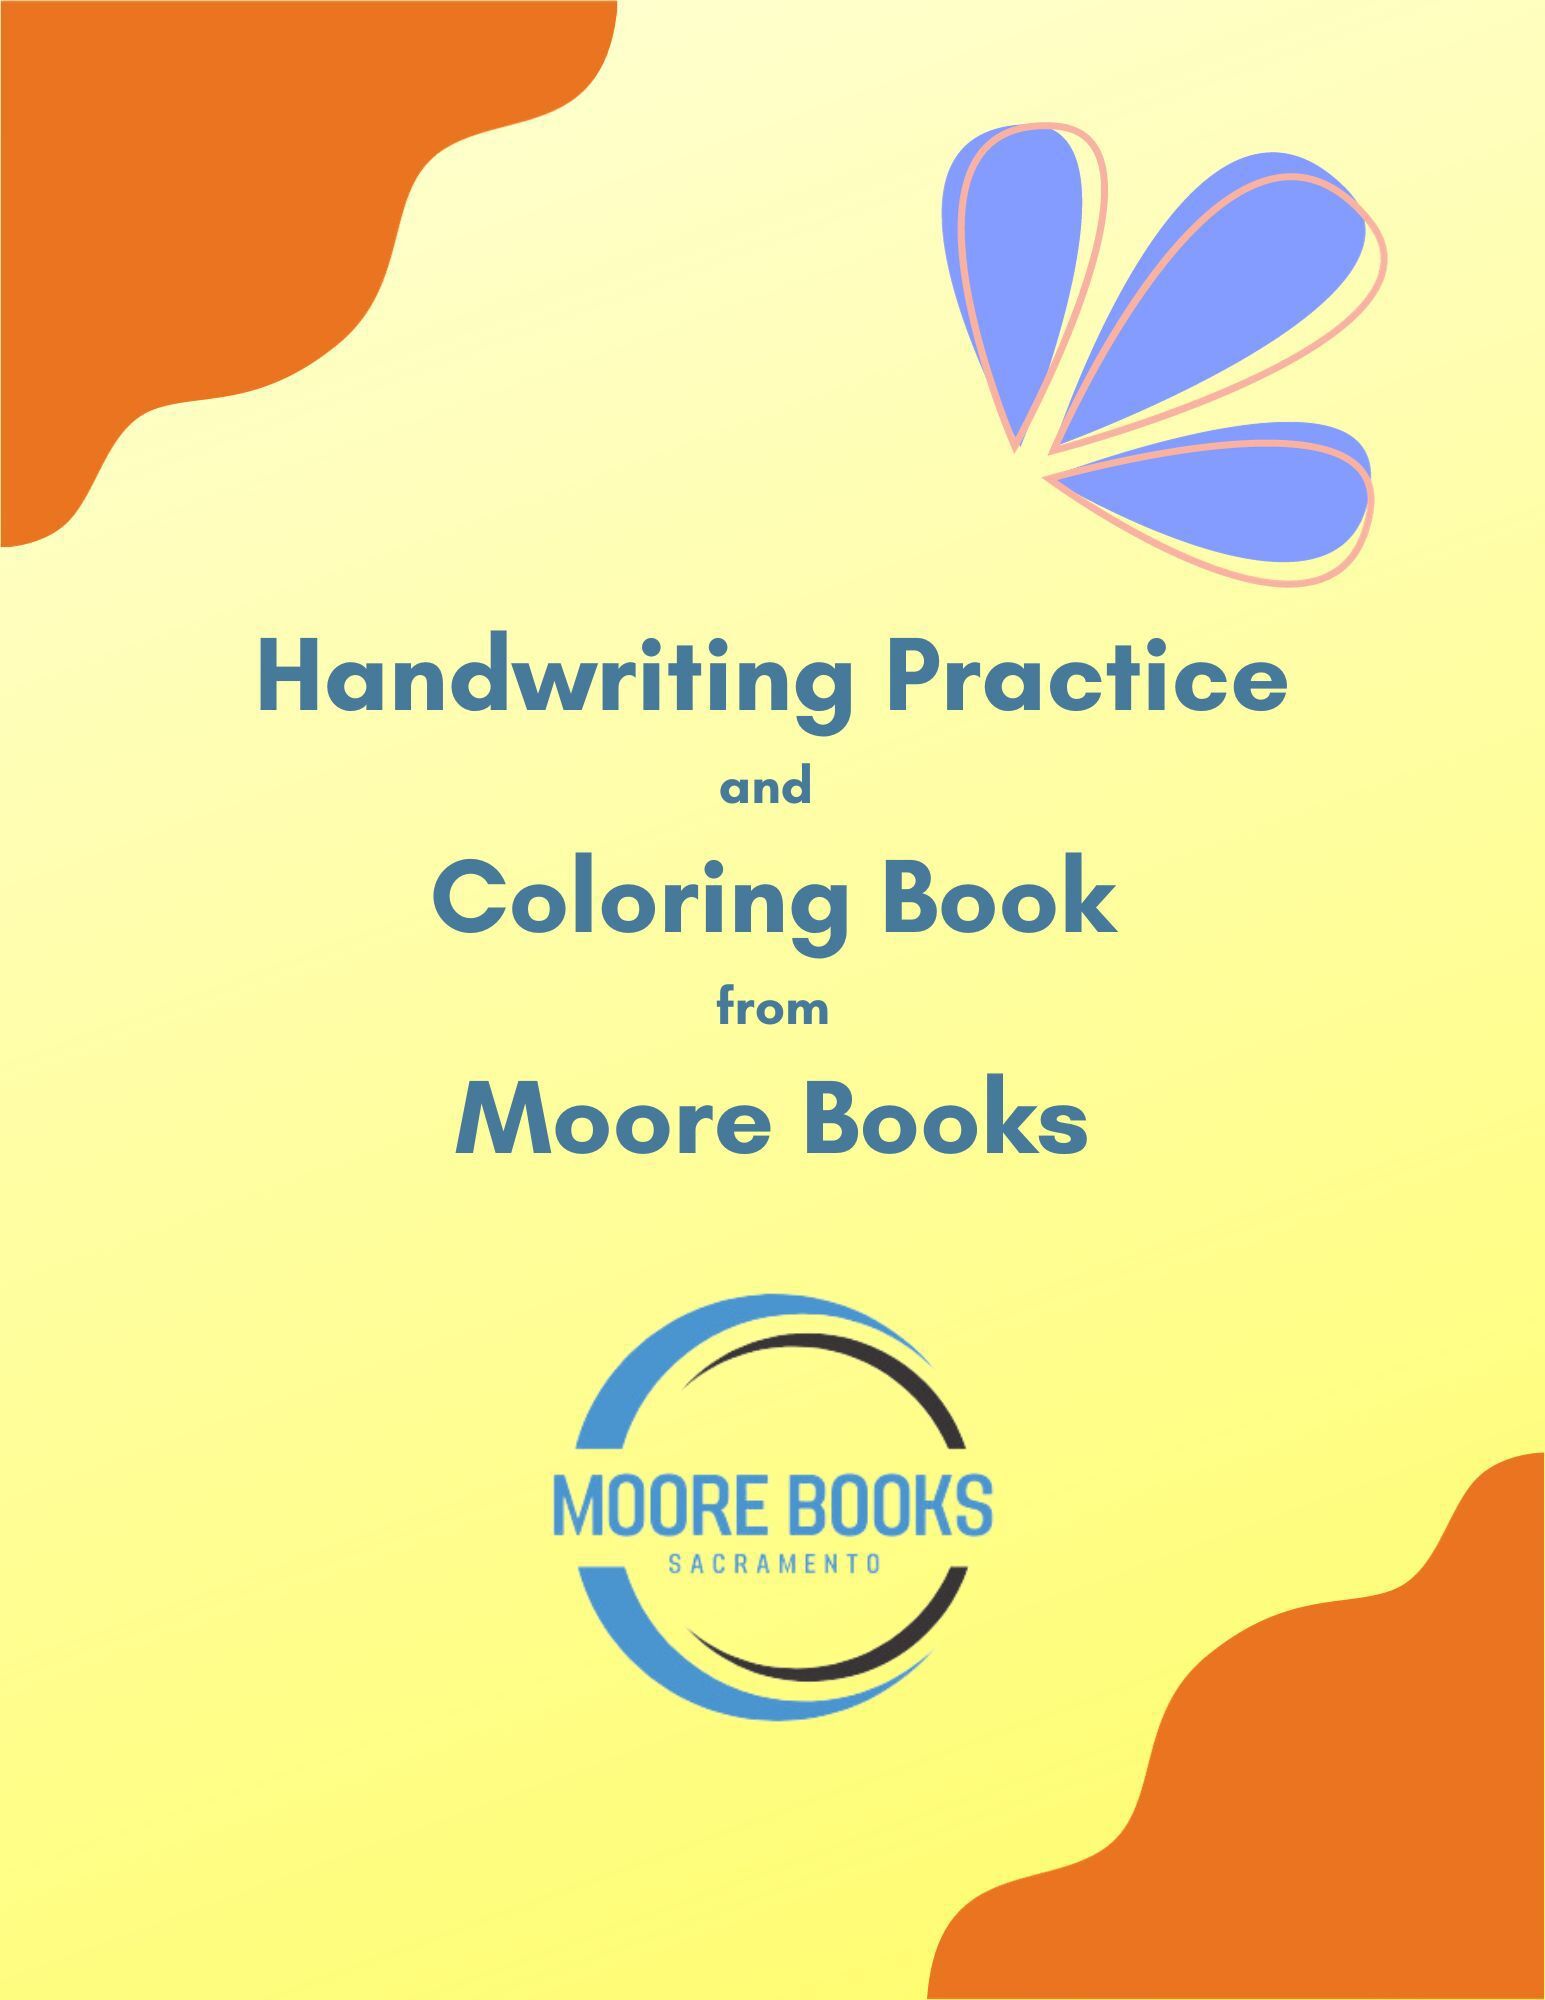 Handwriting Practice and Coloring Book